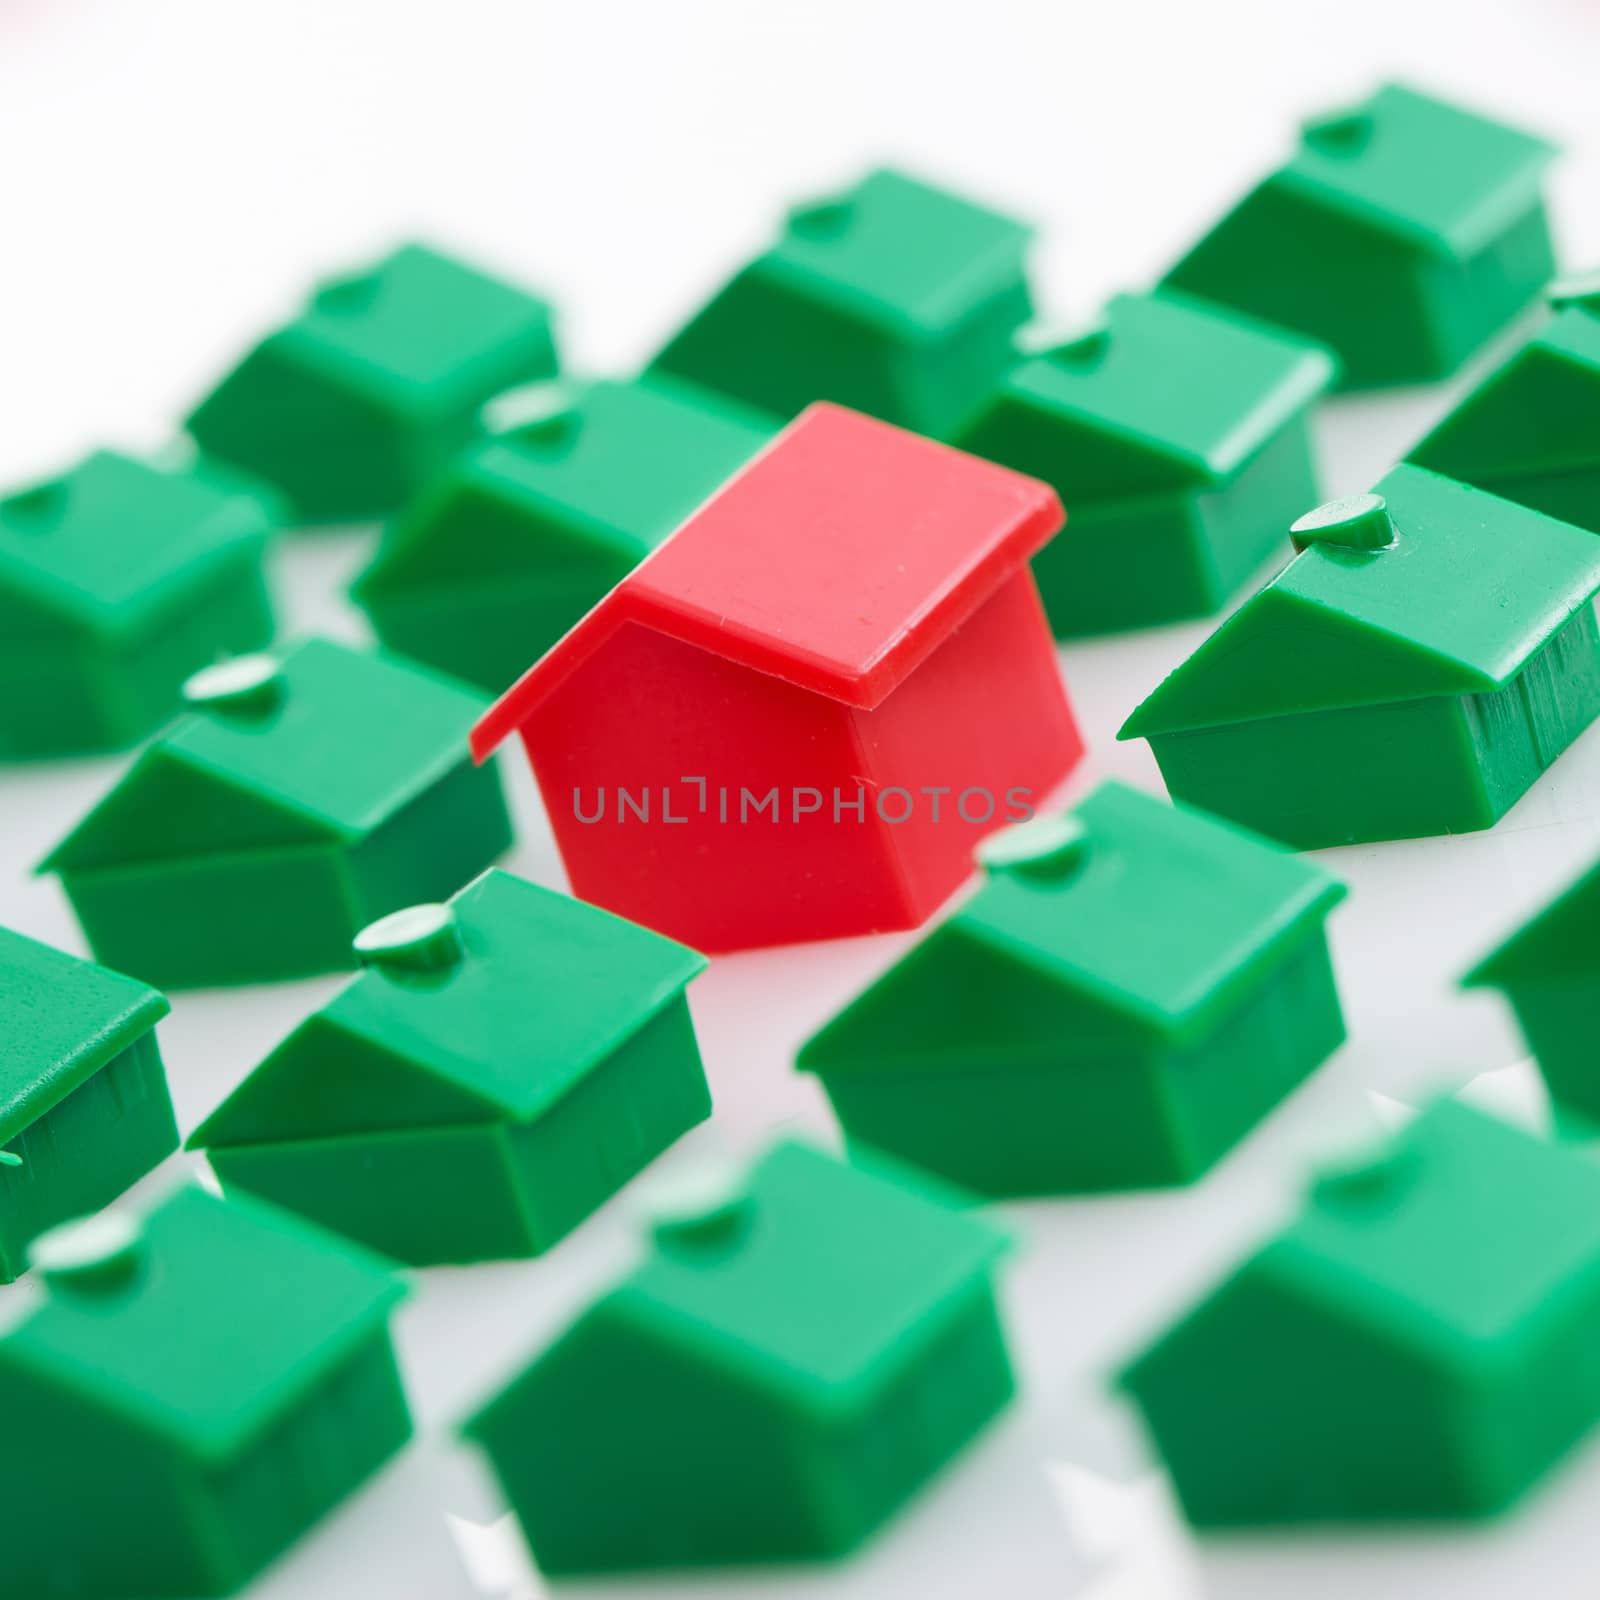 Many green toy houses and one red in the middle over a white background